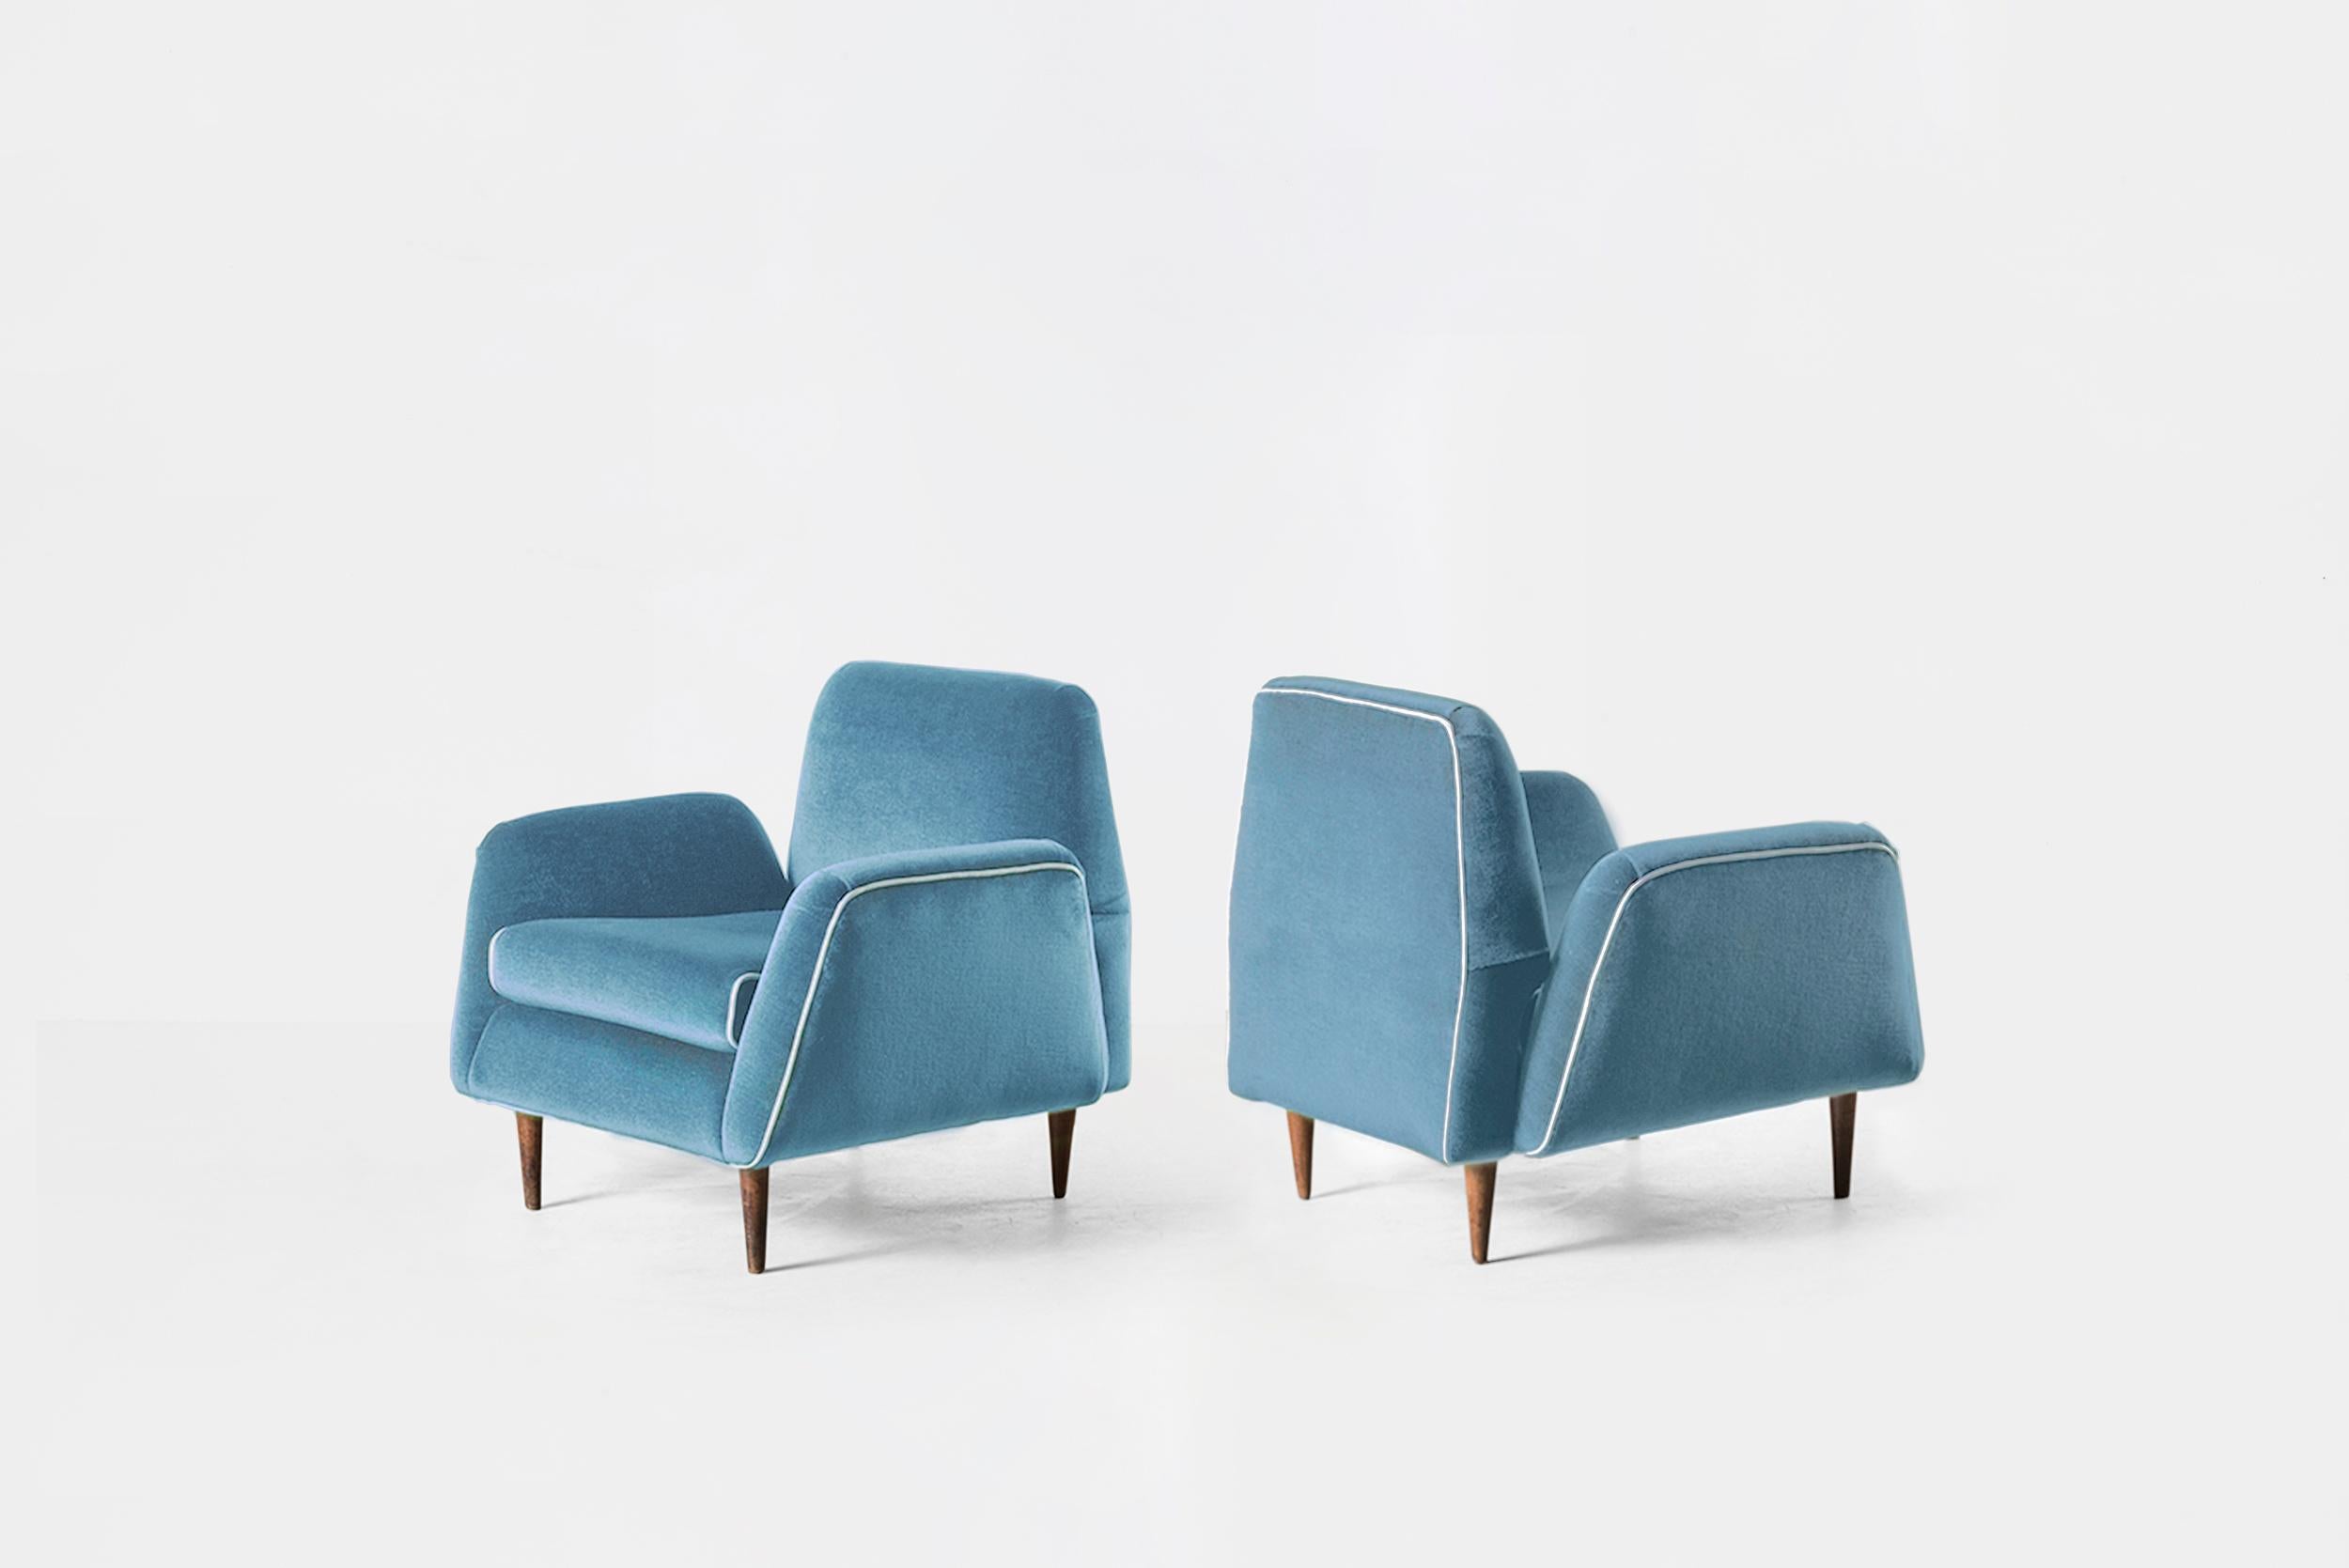 Carlos Hauner & Martin Eisler
Pair of armchairs
Manufactured by Forma Moveis
Brazil, 1955
Caviuna wood legs, velvet and cotton upholstery

Measurements:
77 cm x 77 cm x 72 H cm.
30.3 in x 30.3 in x 28.3 H in.

Literature:
Casa & Jardim,